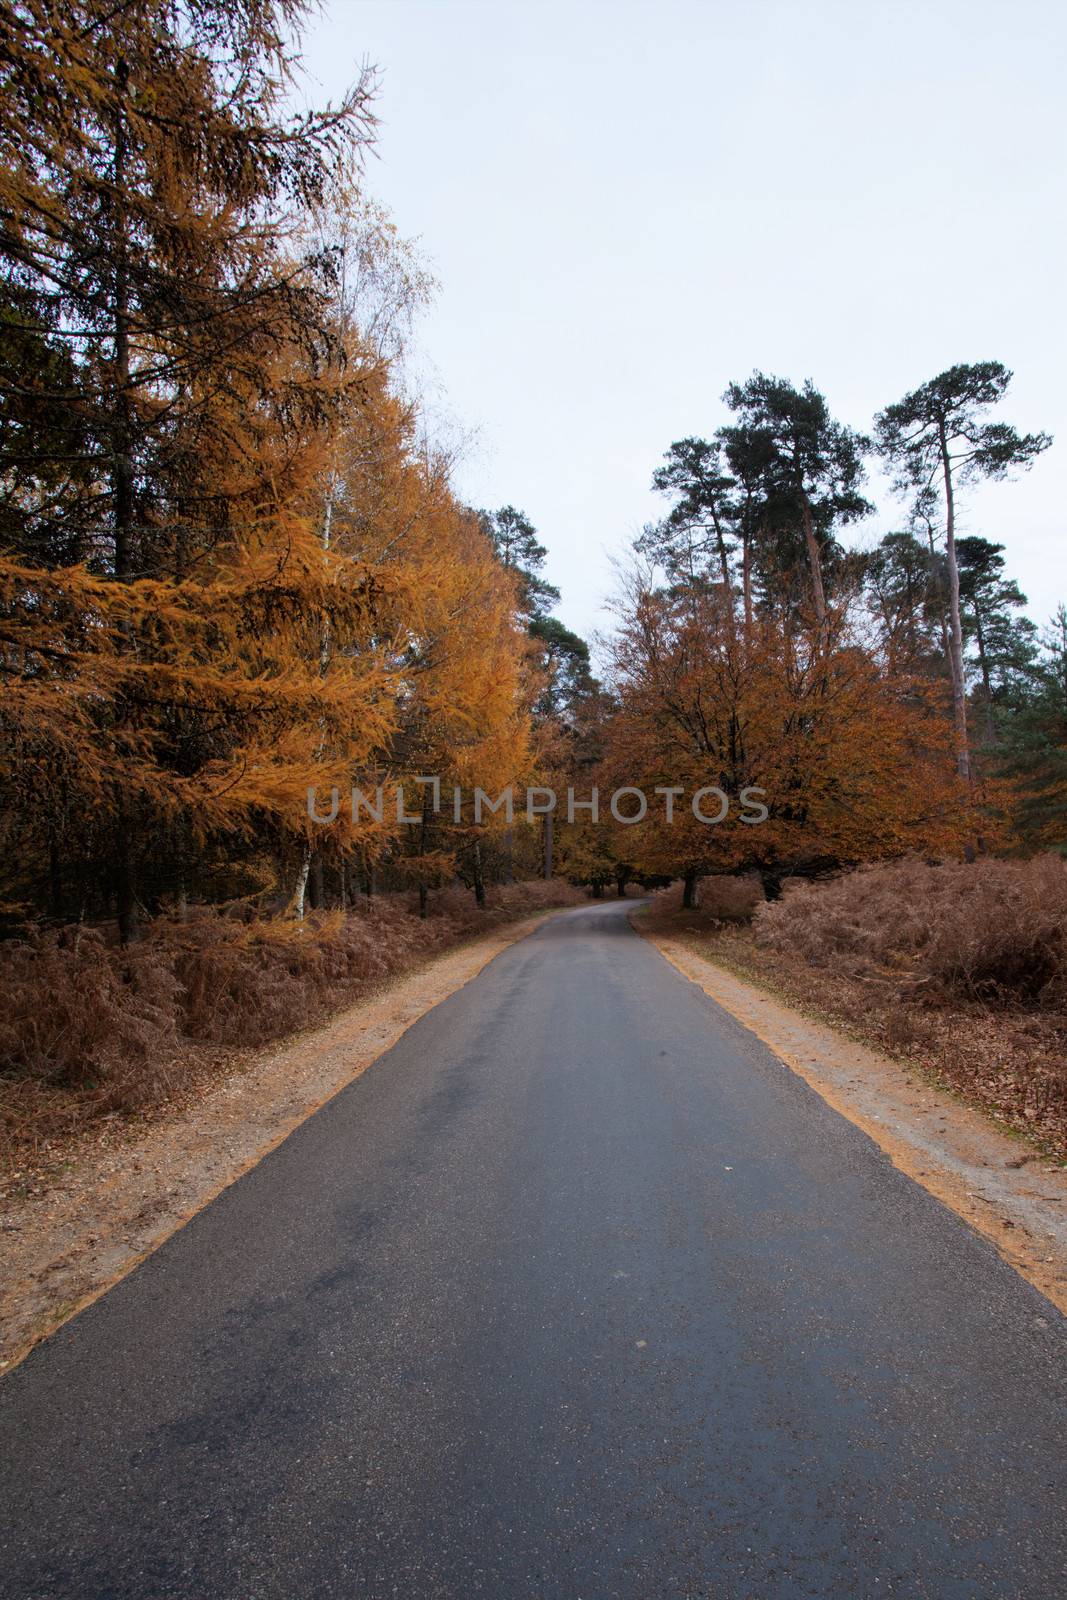 Road leads through the New Forest in autumn in Hampshire south England